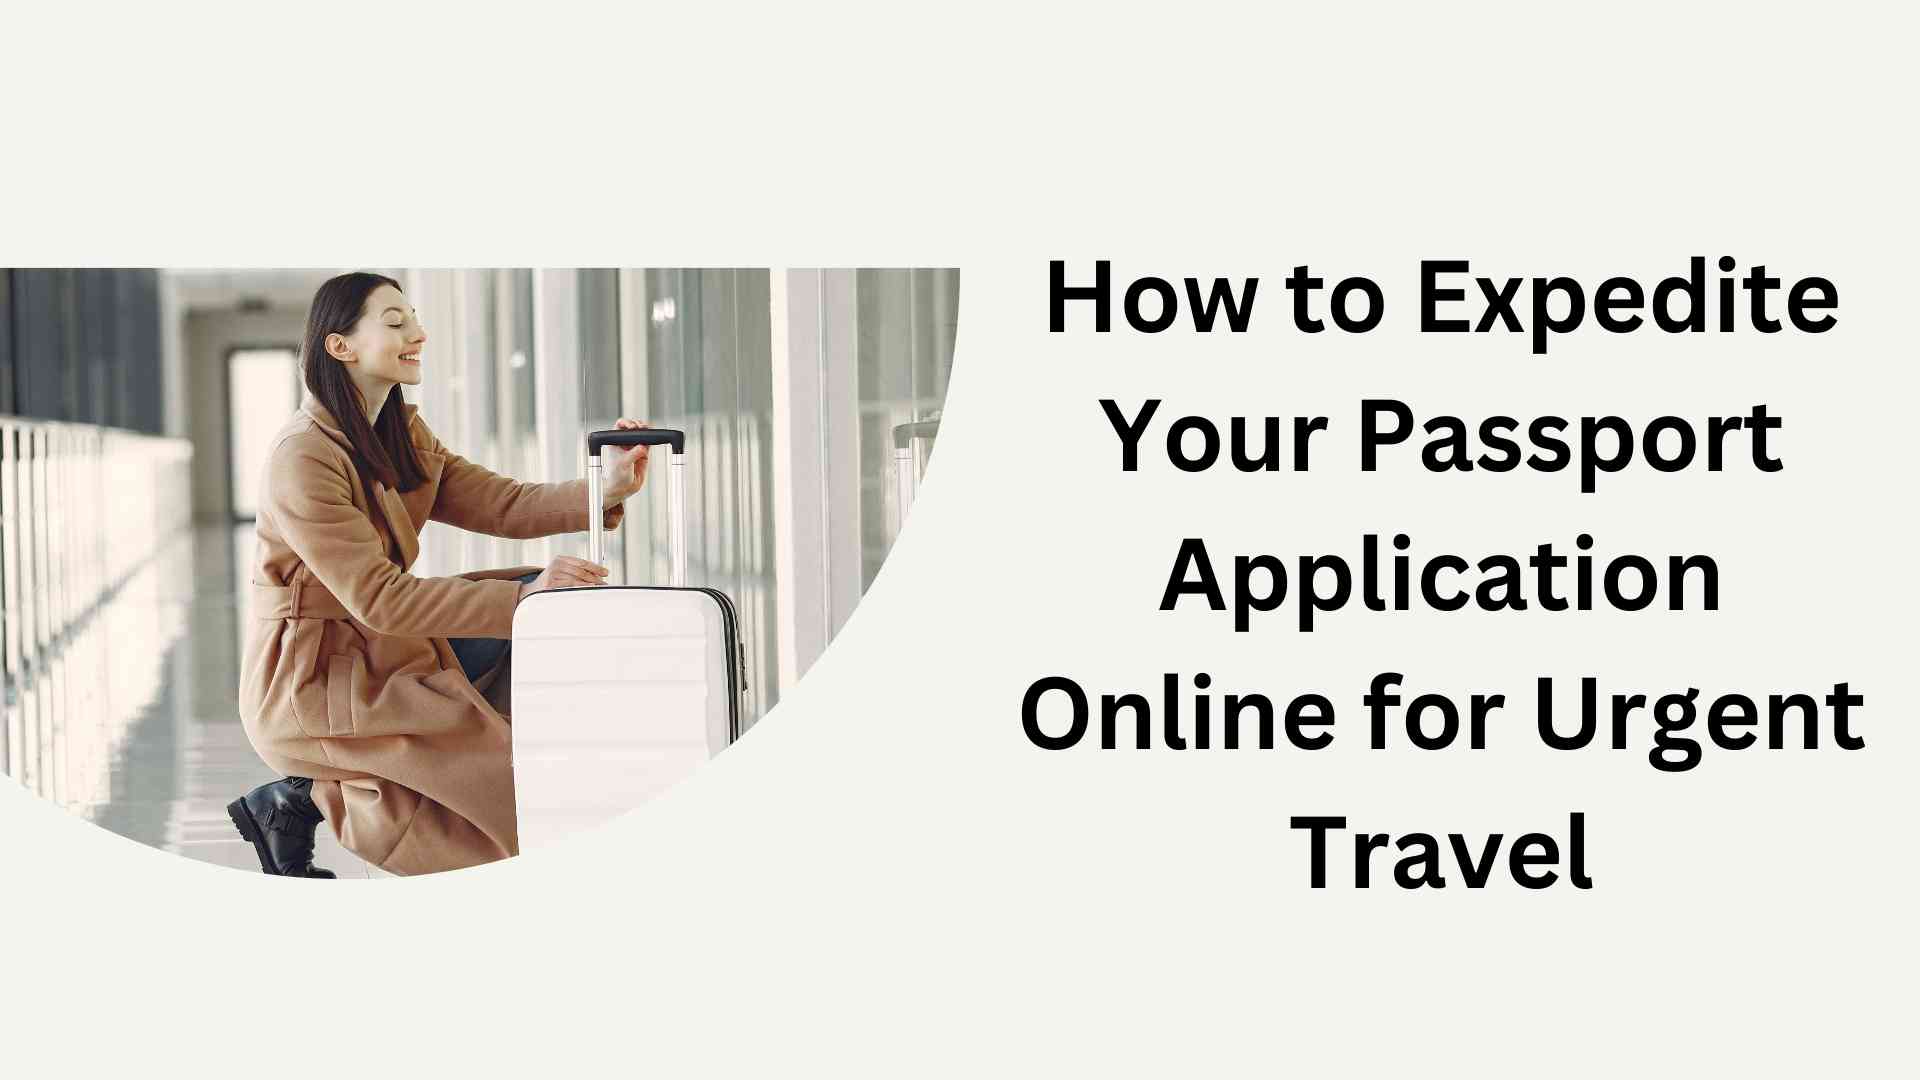 How to Expedite Your Passport Application Online for Urgent Travel